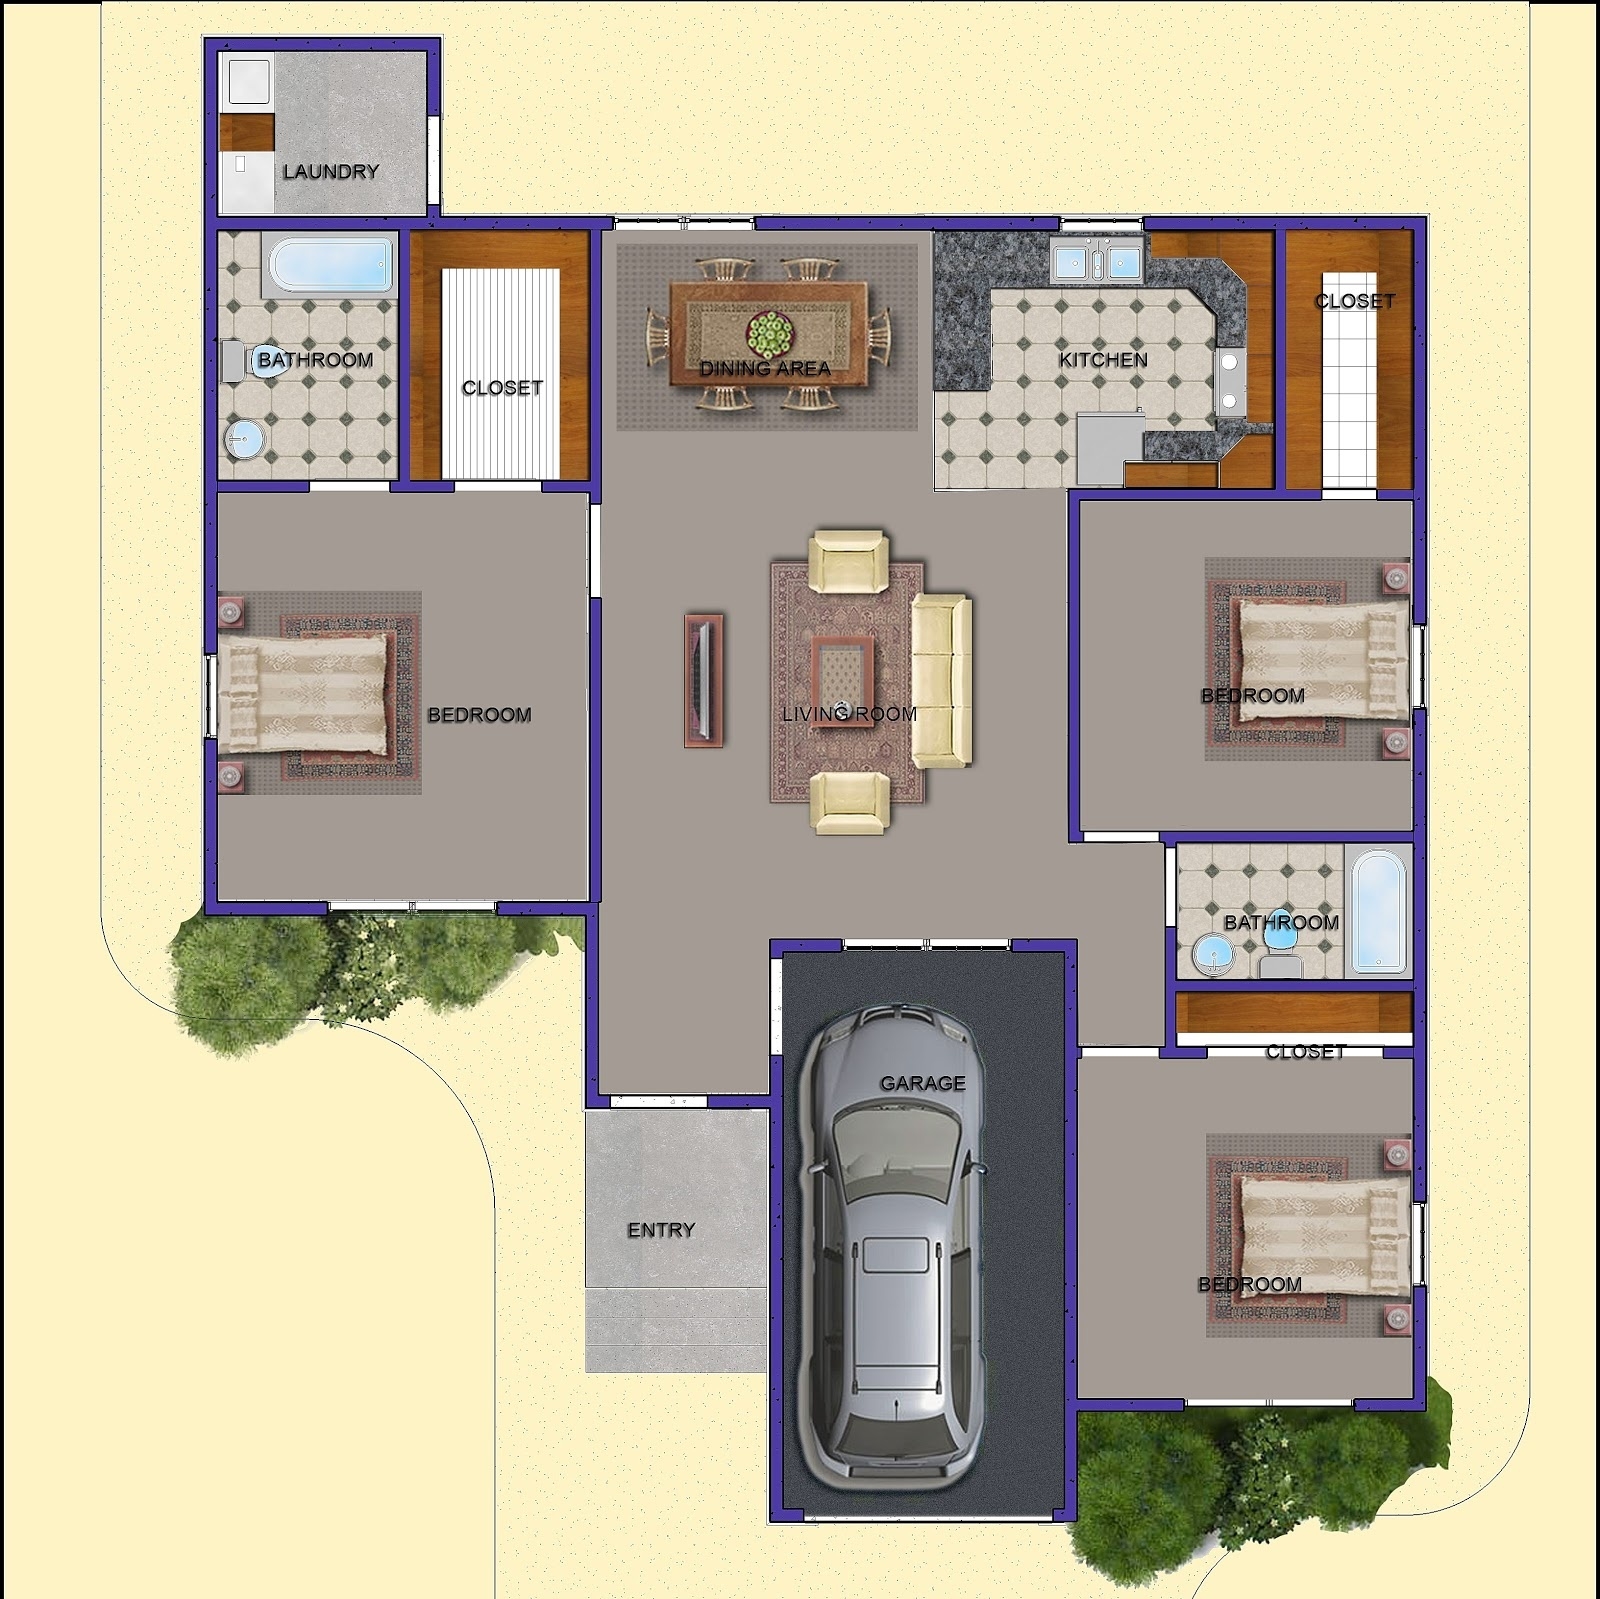 Inspiring best house floor plan design 3 bedroom most popular new home floor plans for gorgeous plan of house with 3 bed rooms